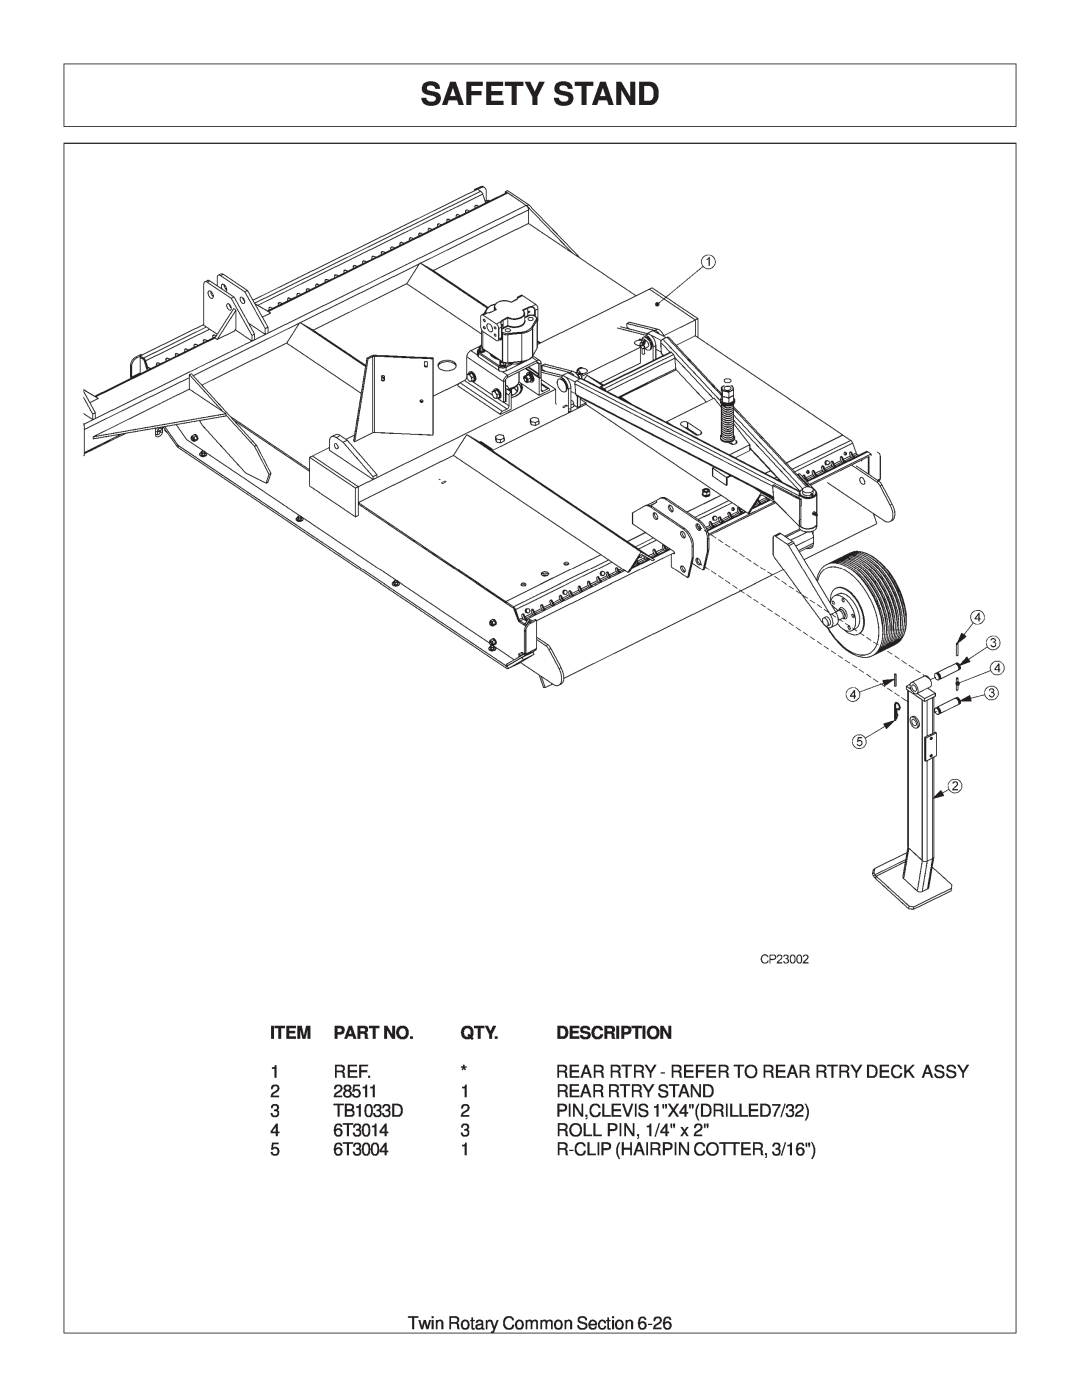 Tiger Products Co., Ltd 6020009 manual Safety Stand, Description 